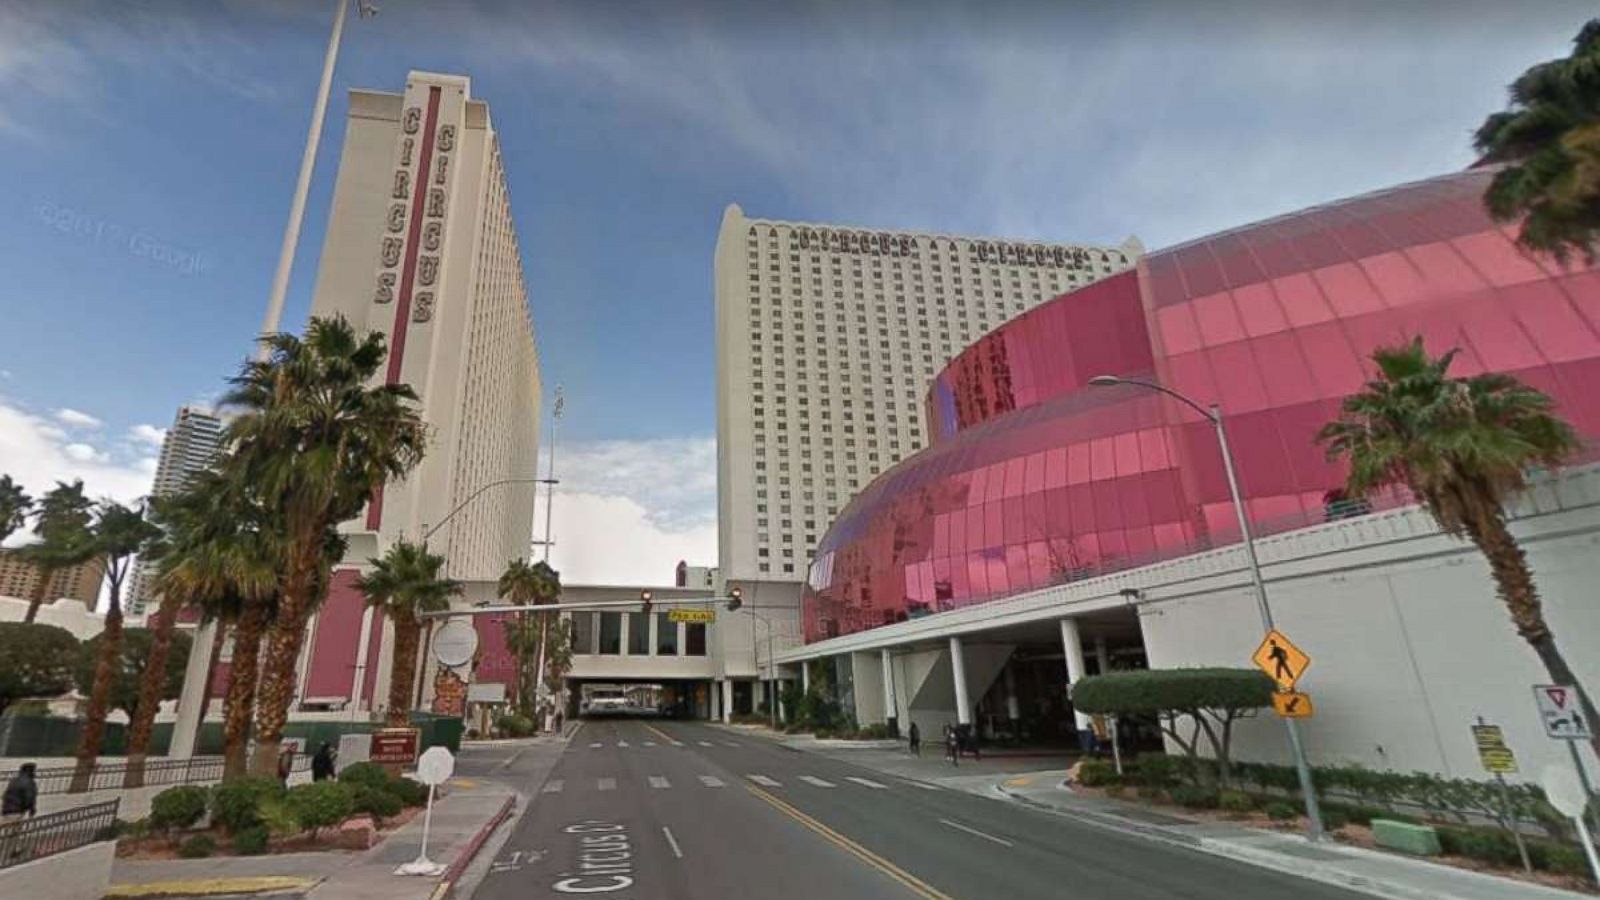 2 stabbed to death at Circus Circus casino in Las Vegas - ABC News